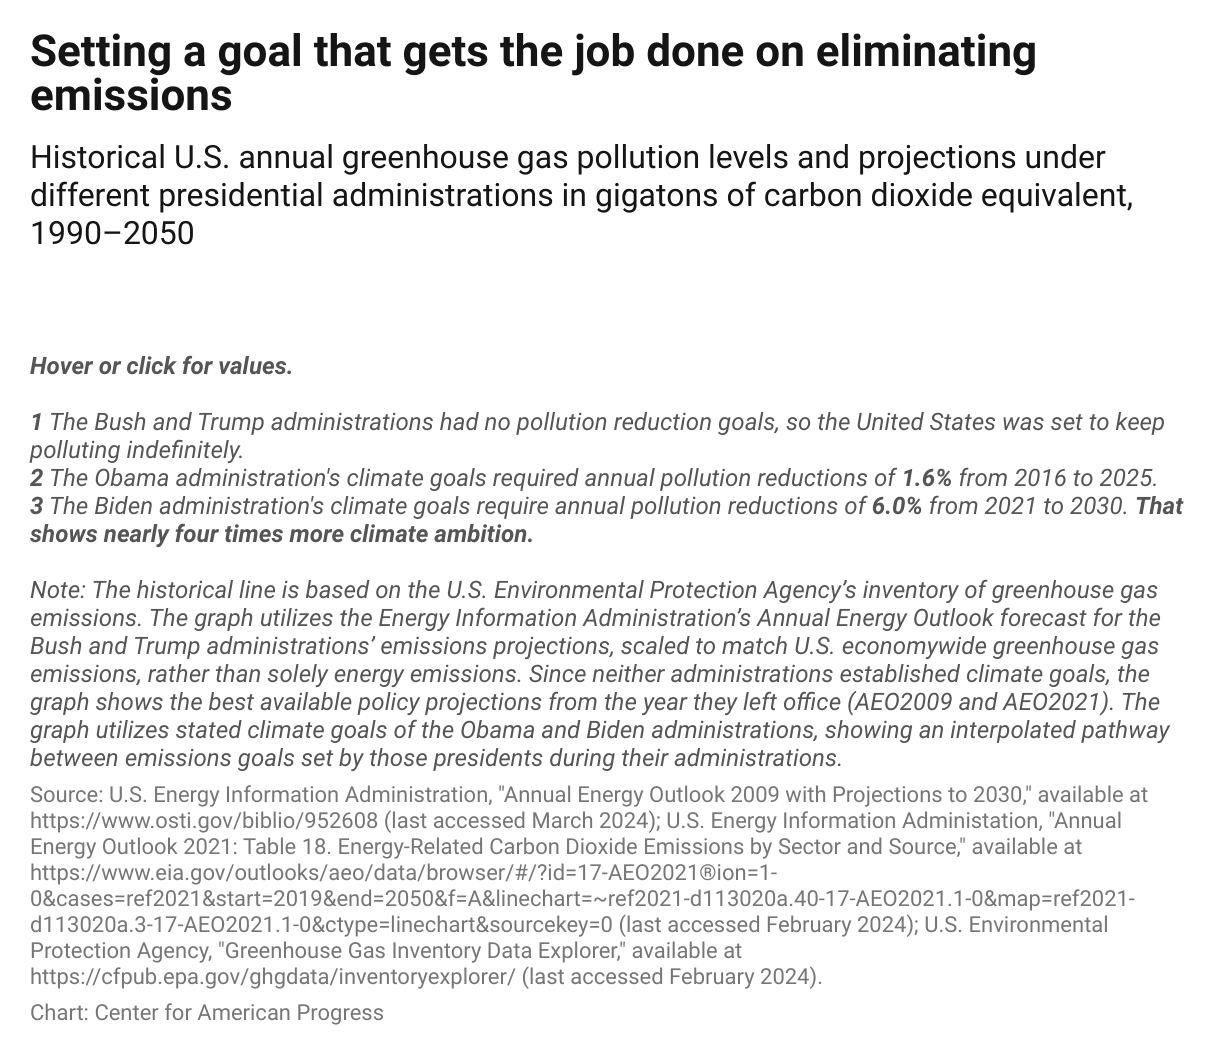 Line graph comparing emissions reductions projections from the Bush, Obama, Trump, and Biden administrations, showing that the Biden administration's climate pledge is the most ambitious because it requires nearly four times more annual pollution reduction than others.